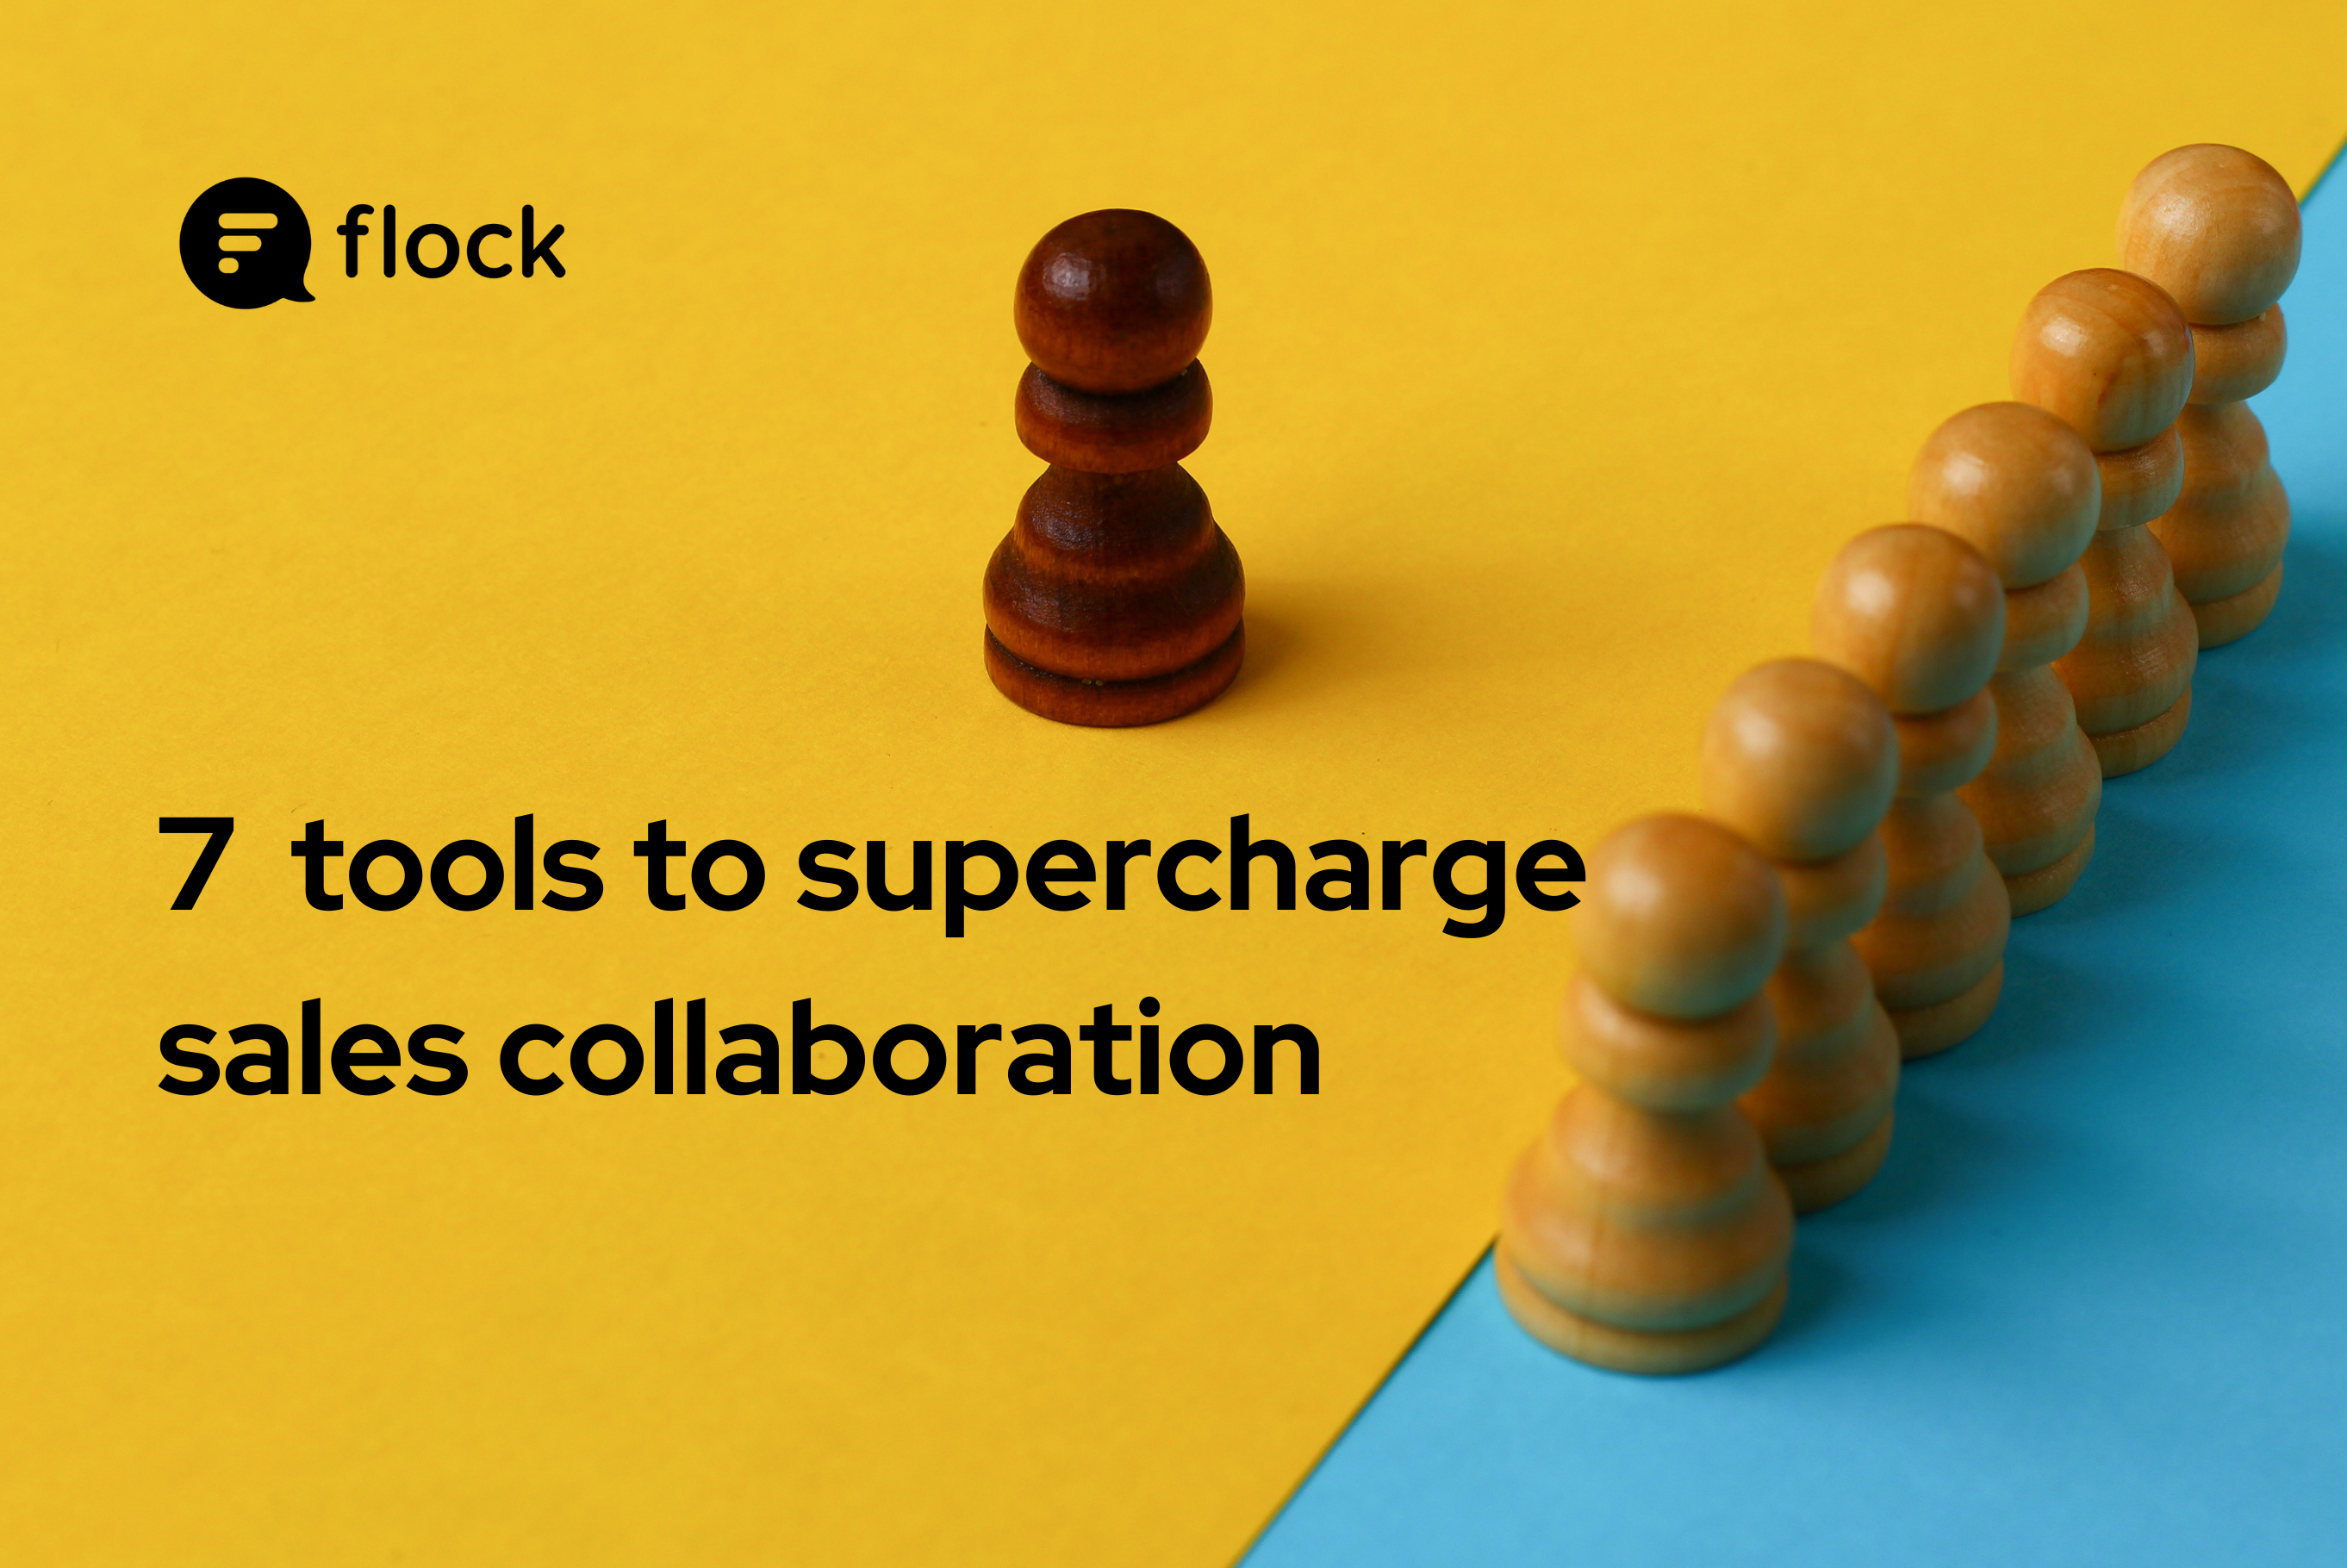 7 tools to supercharge sales collaboration